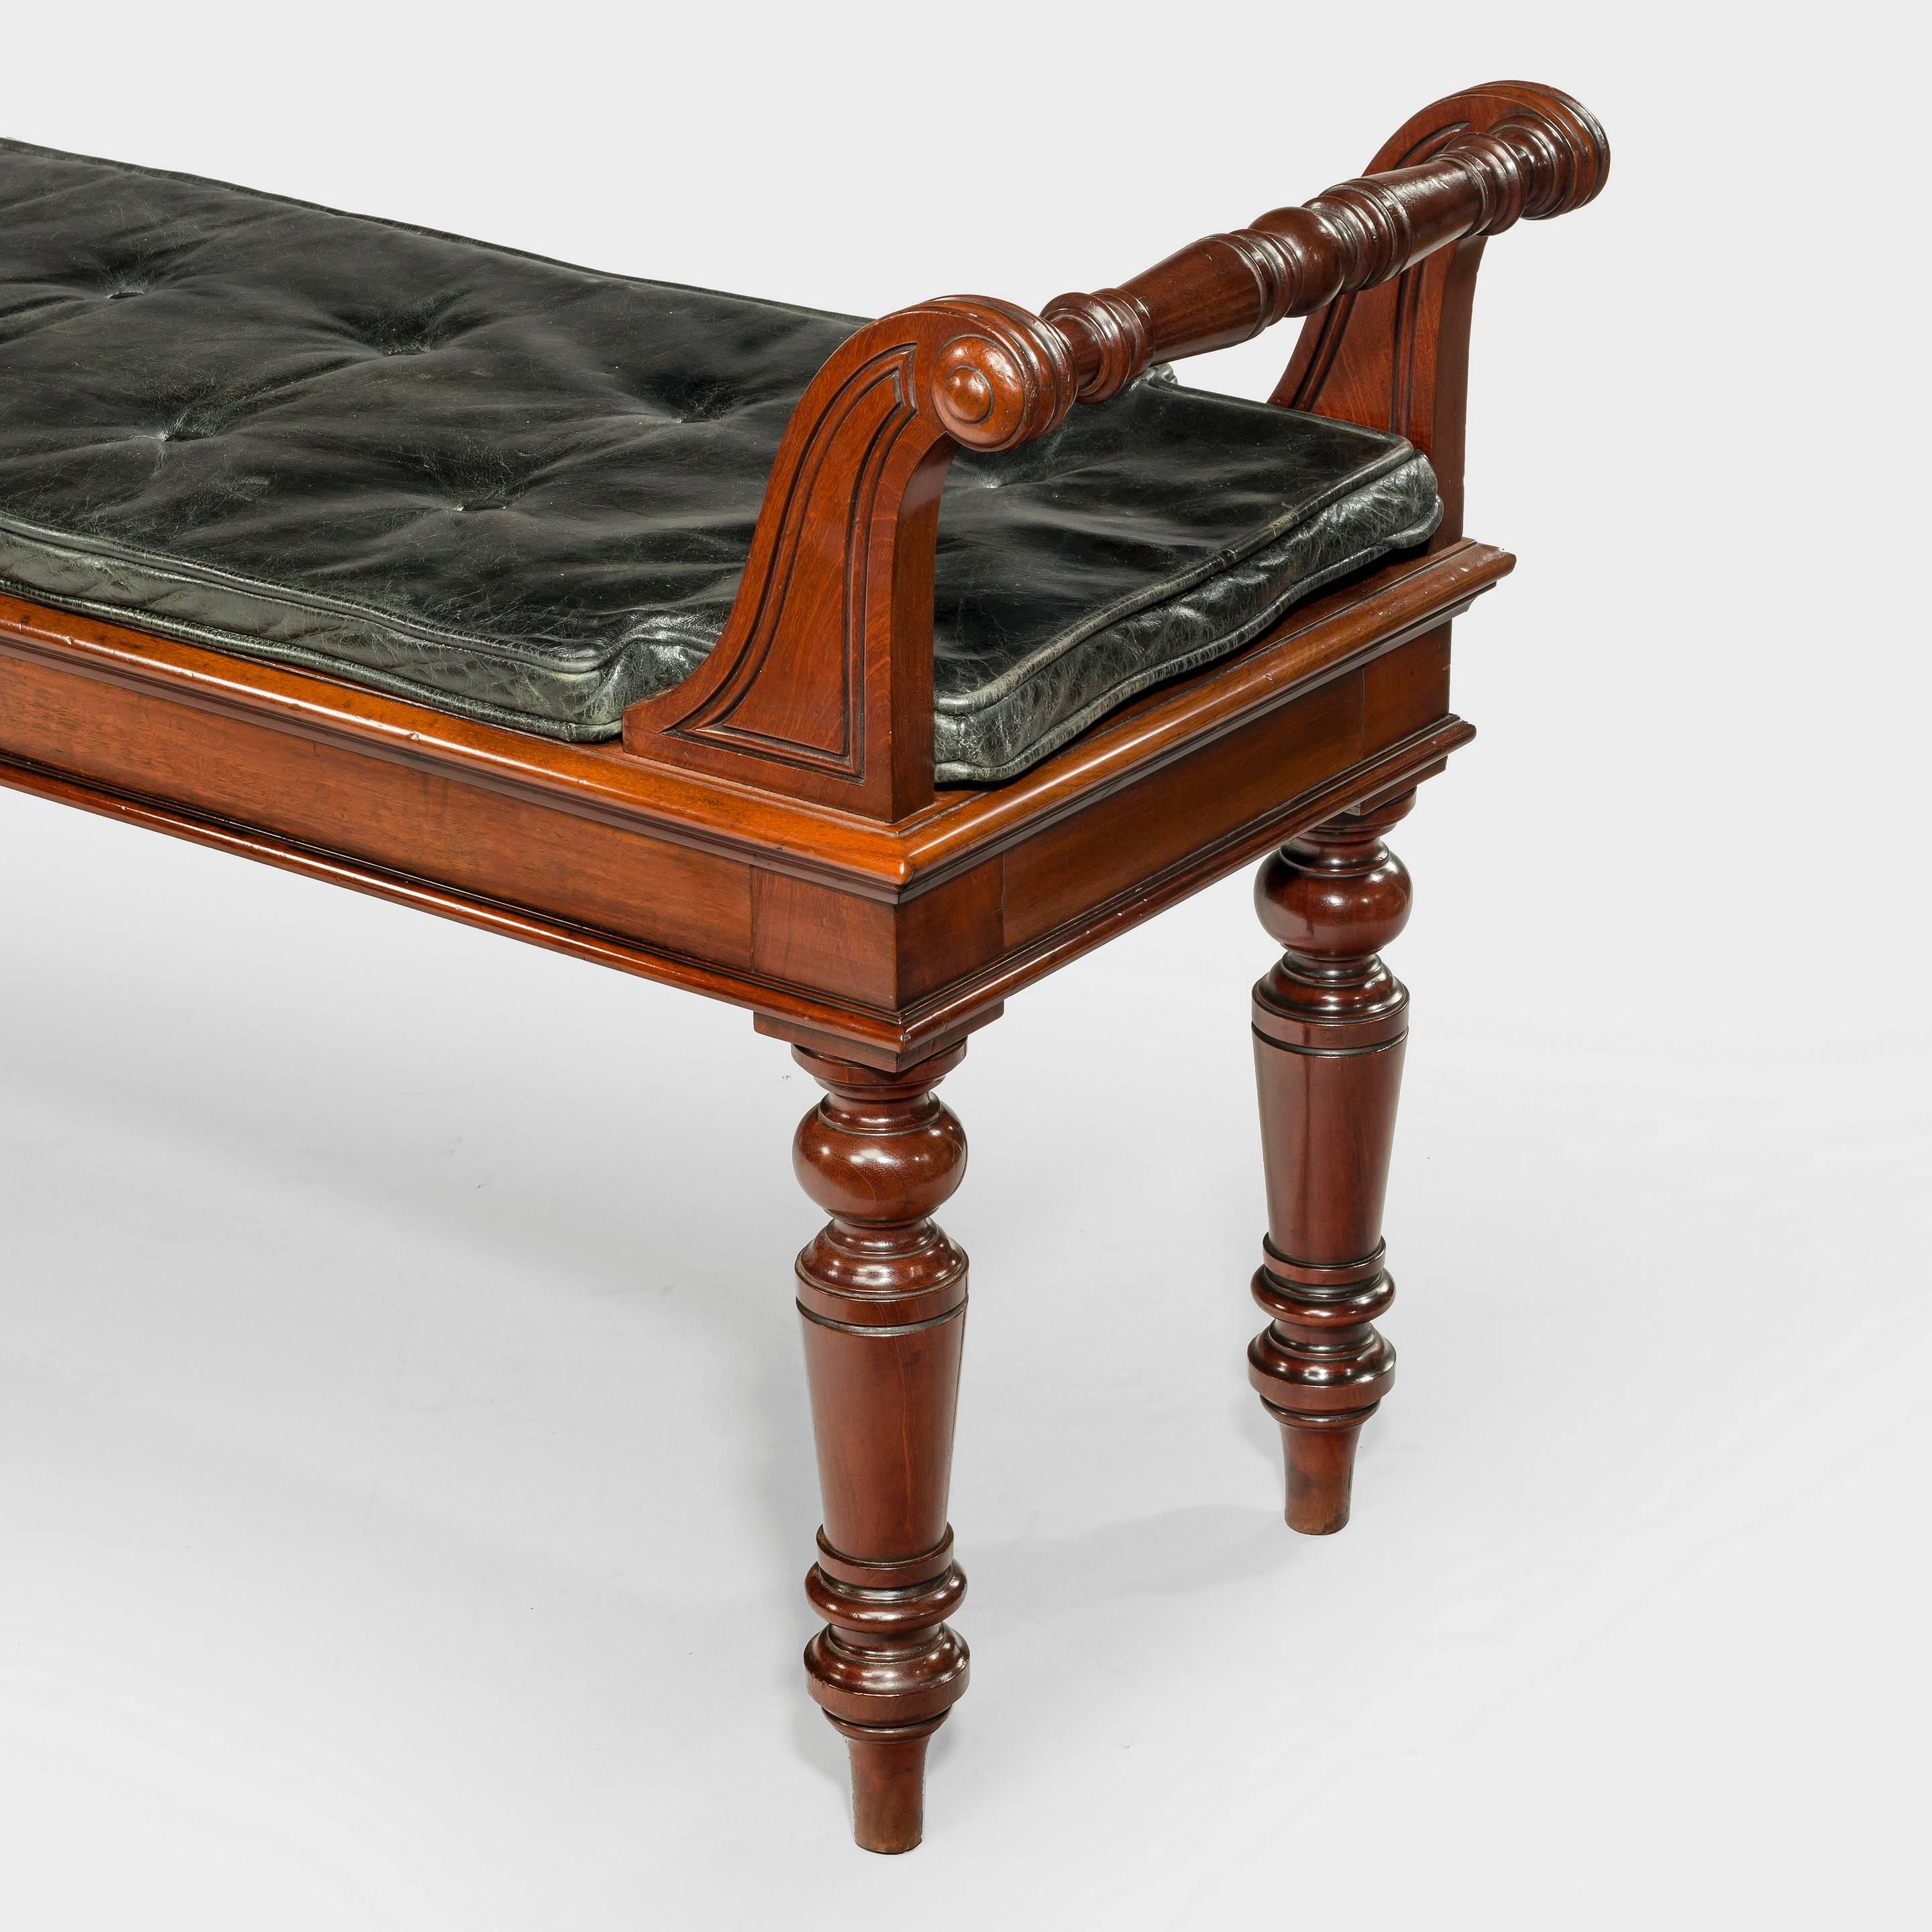 A late 19th century large Victorian mahogany hall bench. 
With a buttoned black leather cushion.